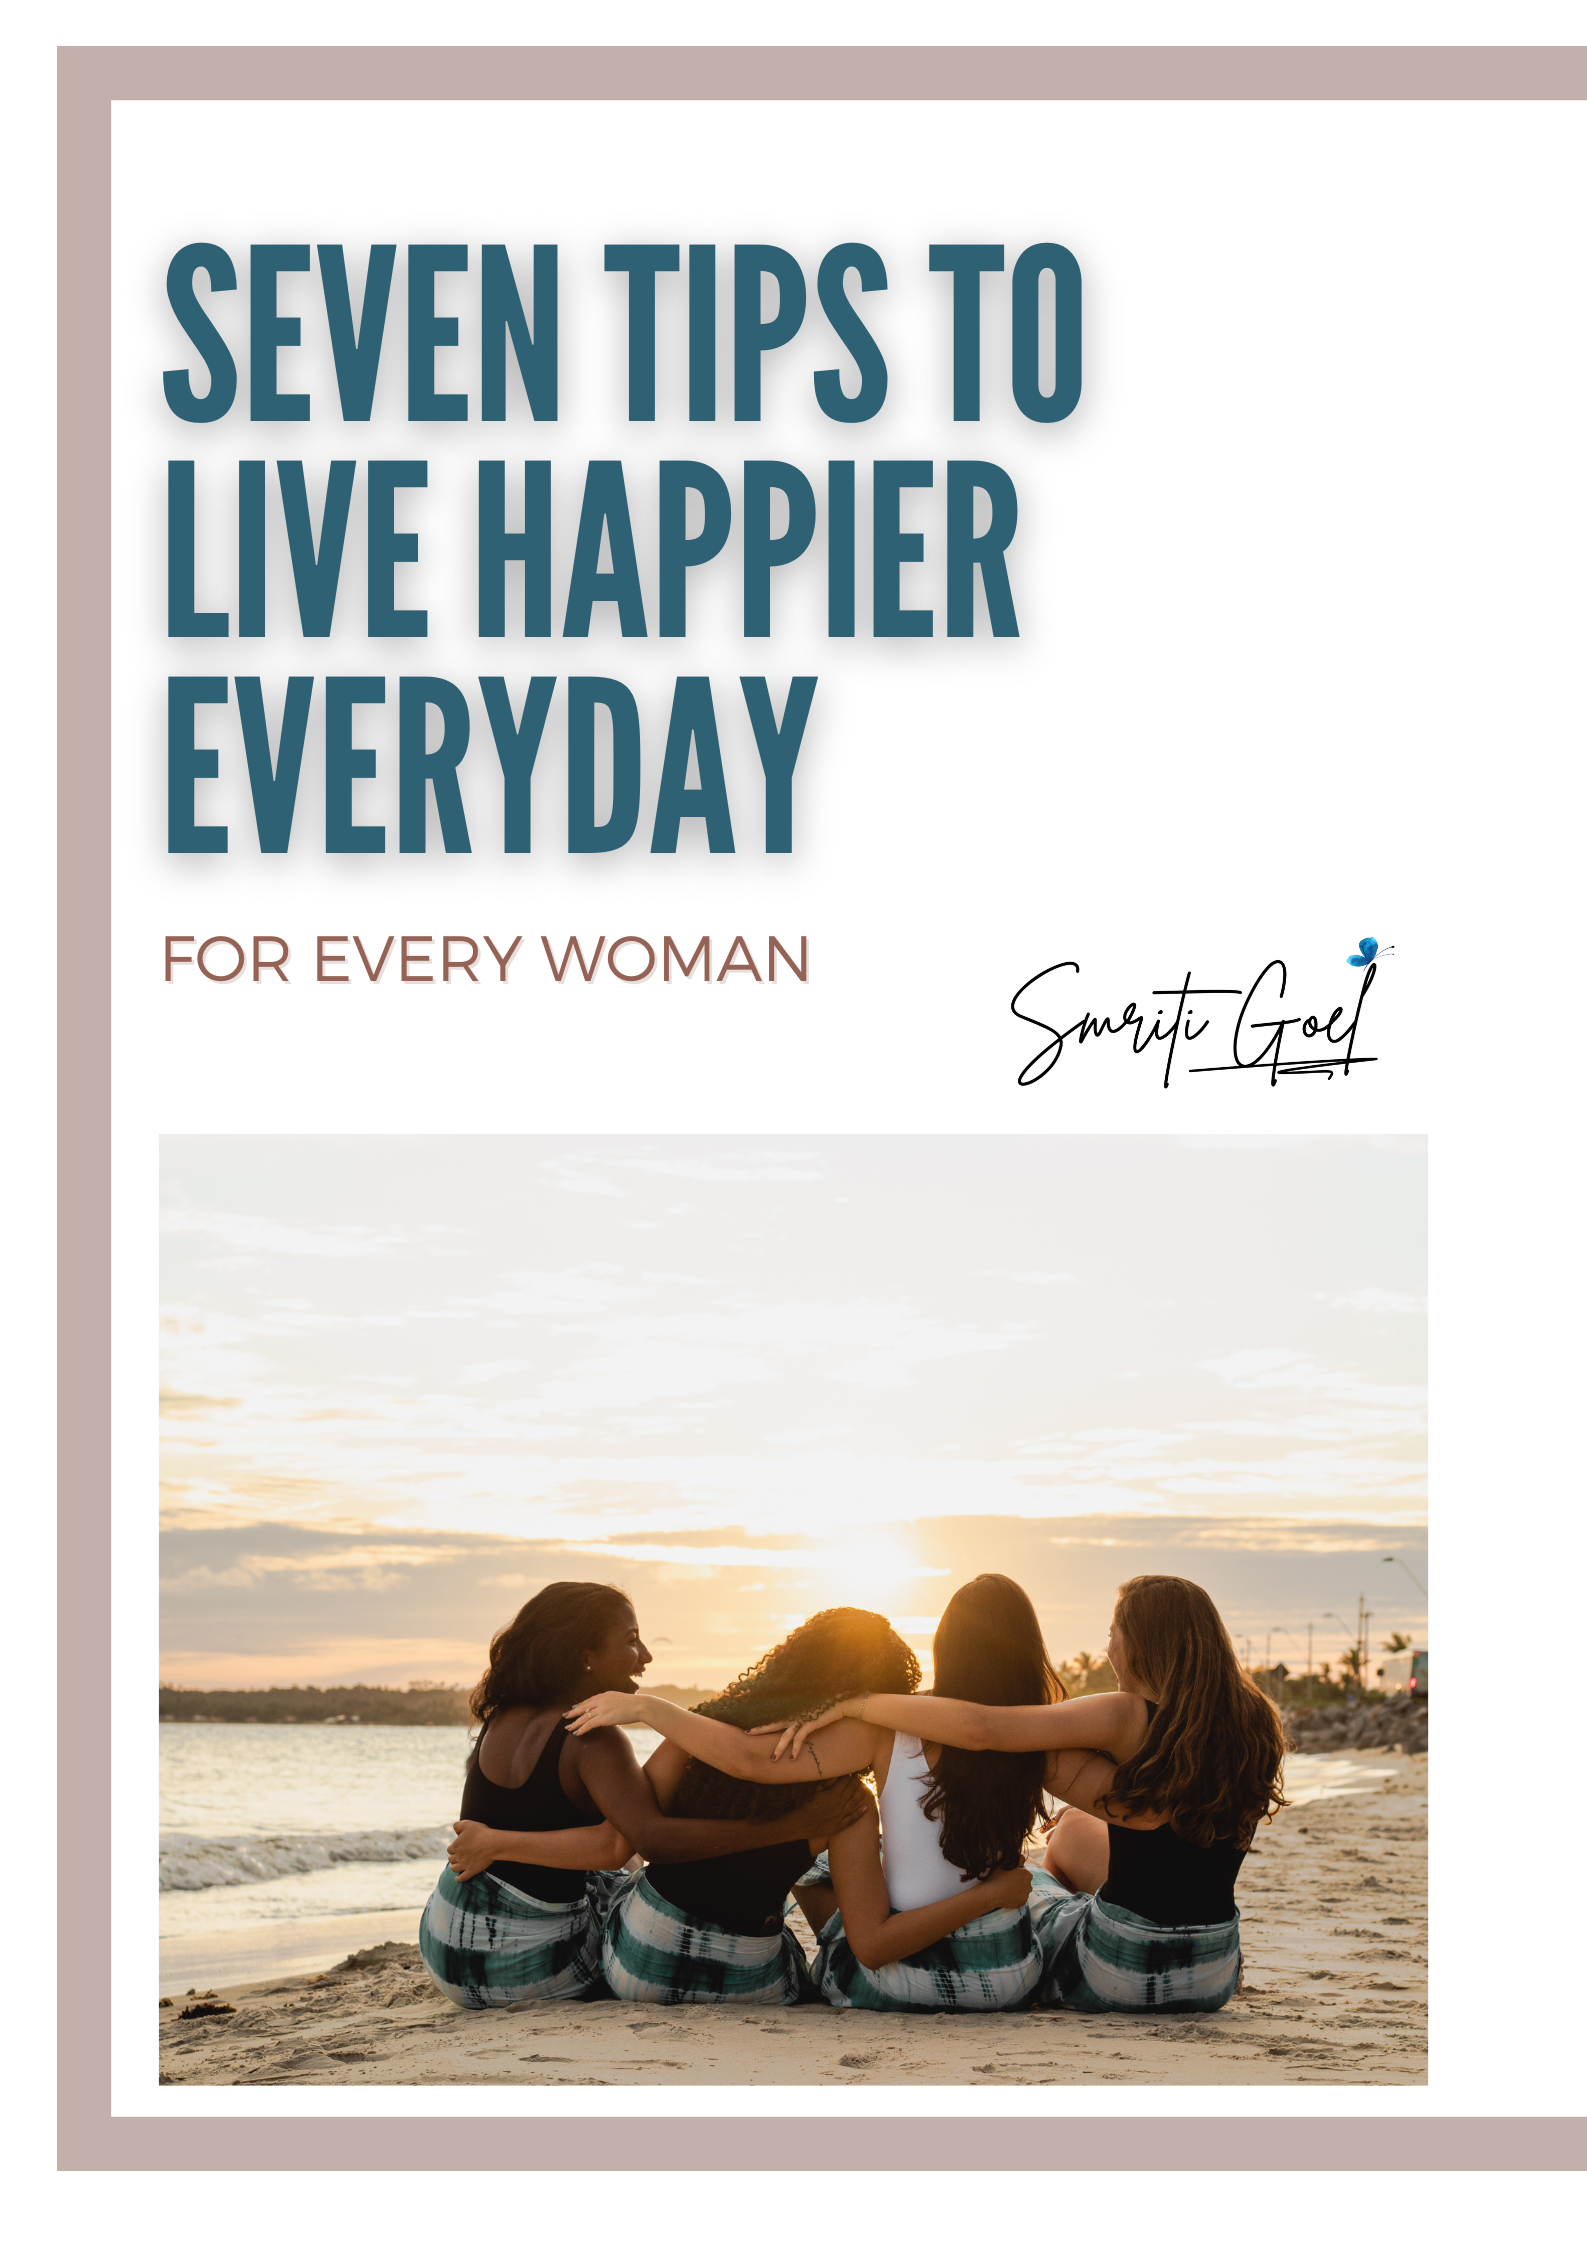 Seven tips for a better life